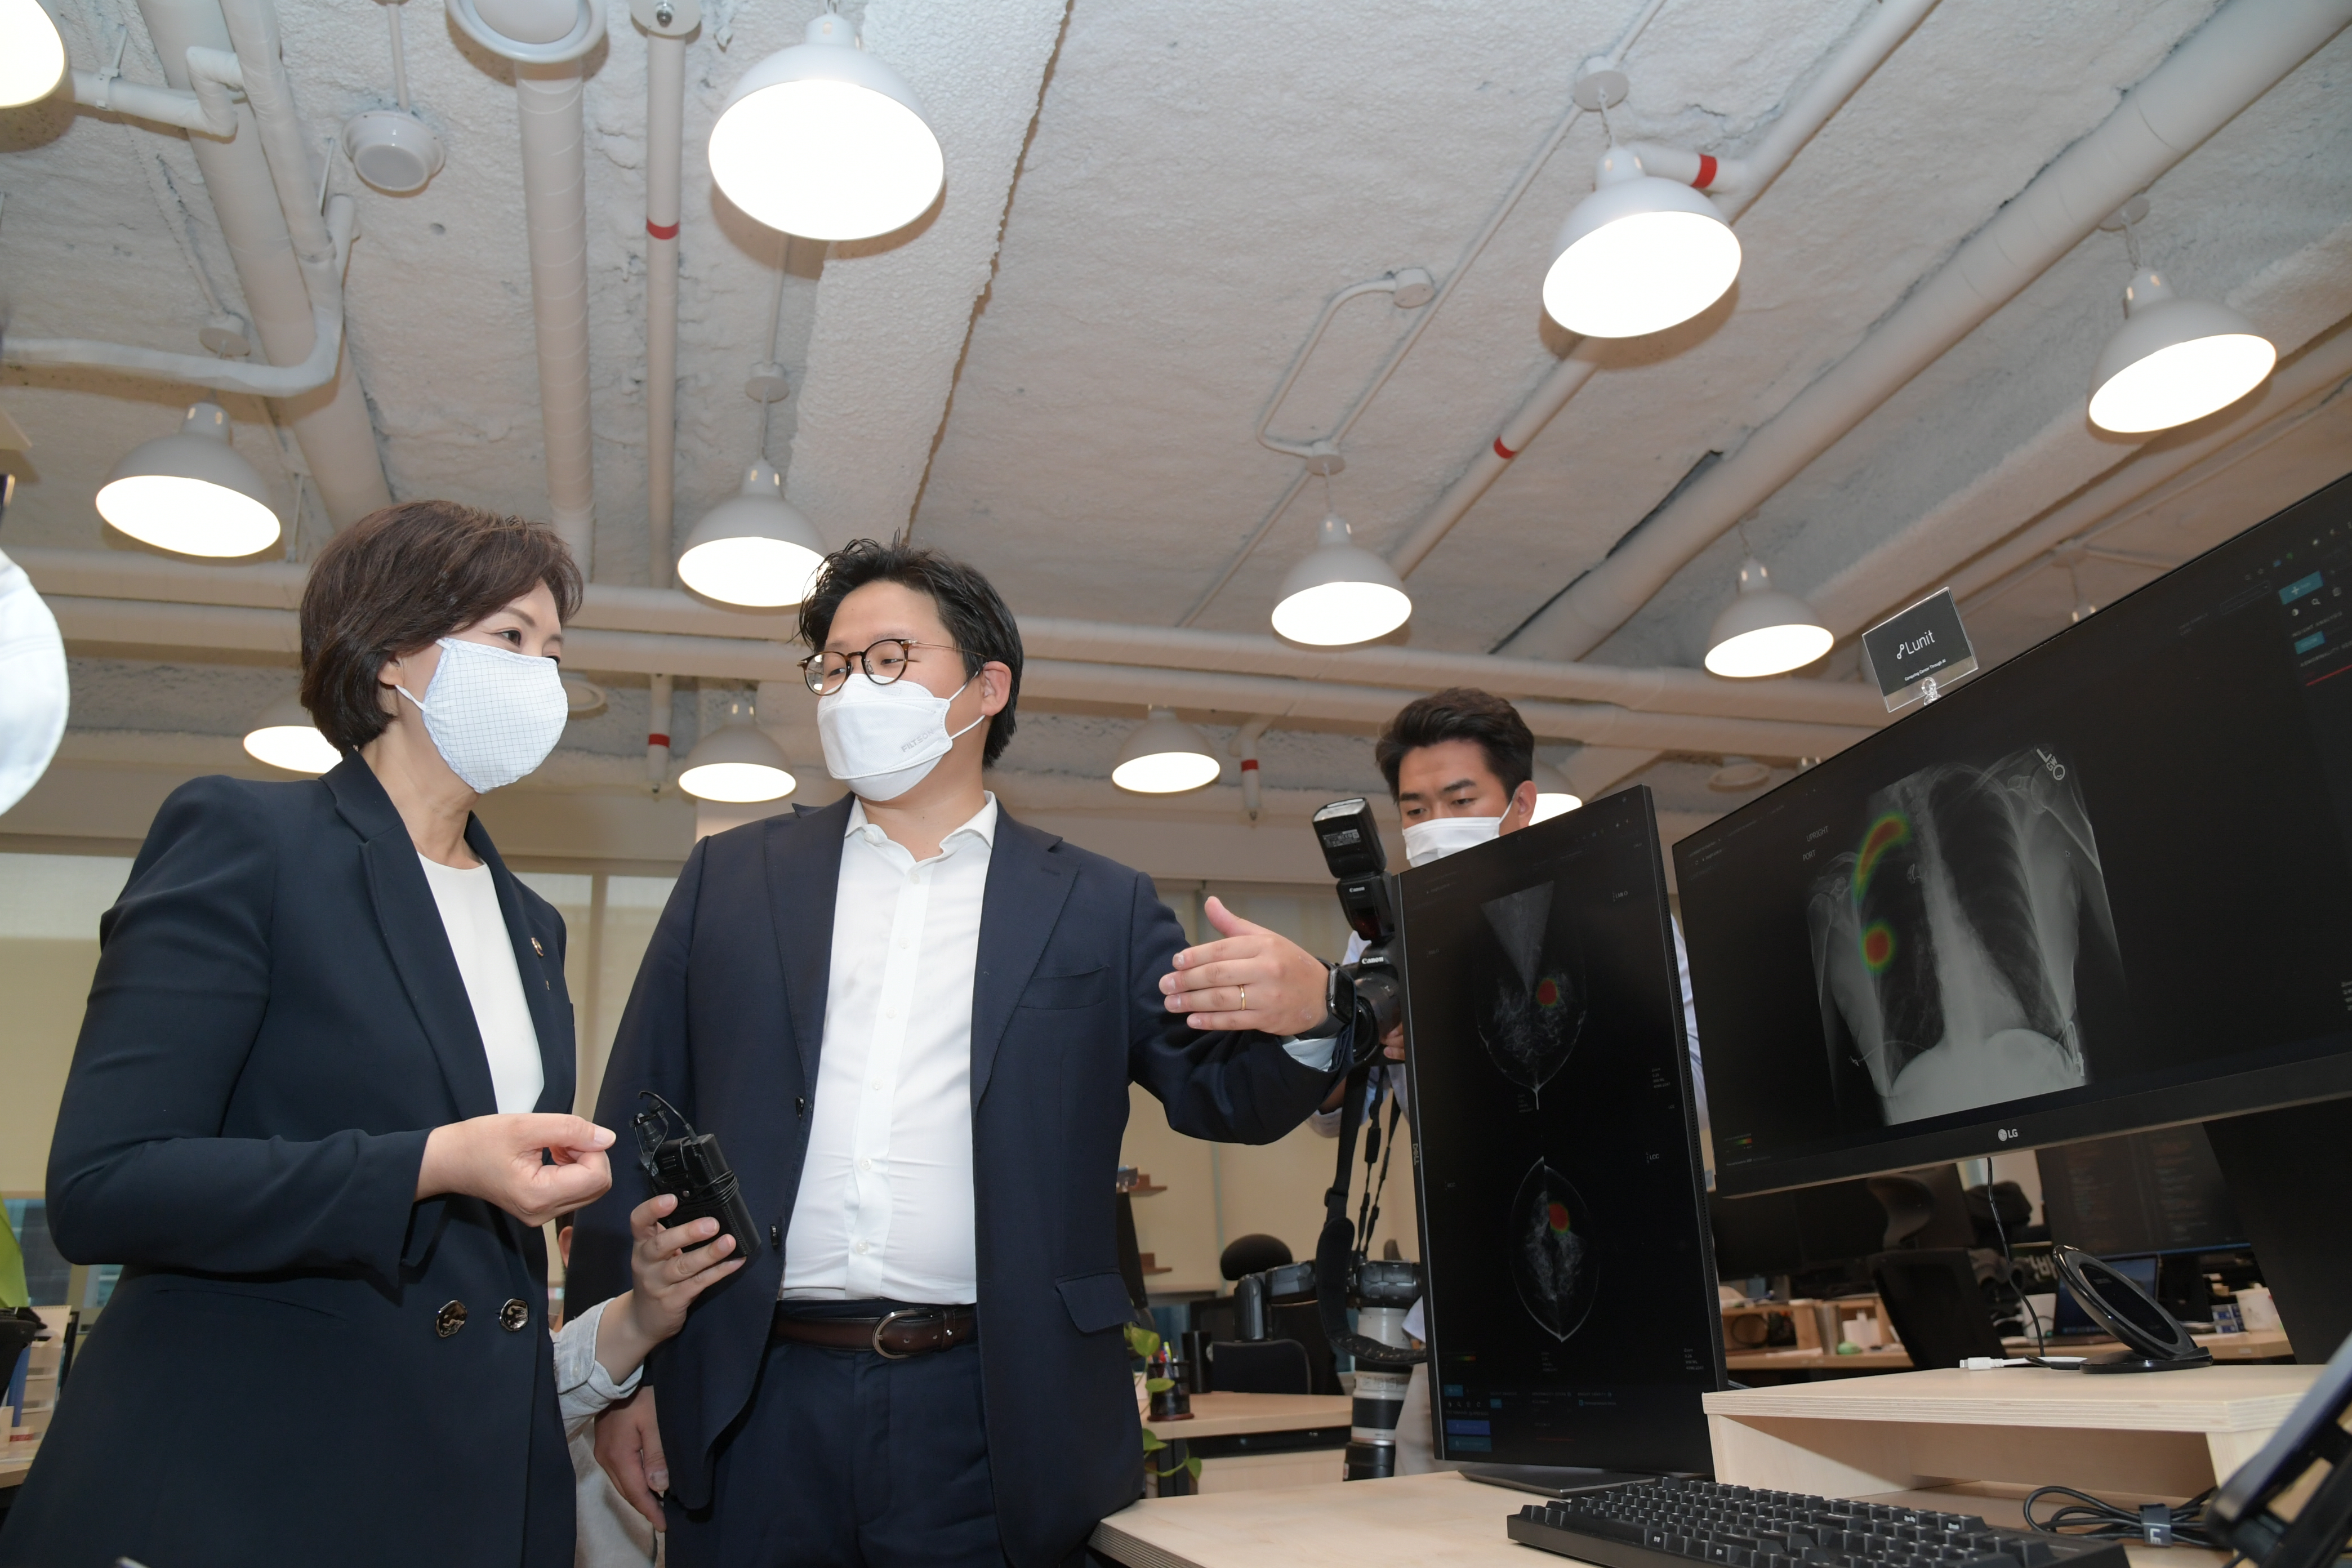 Photo News2 - [Jun. 15, 2020] Minister of Food and Drug Safety visits AI medical devicies company and attends CEO Meeting